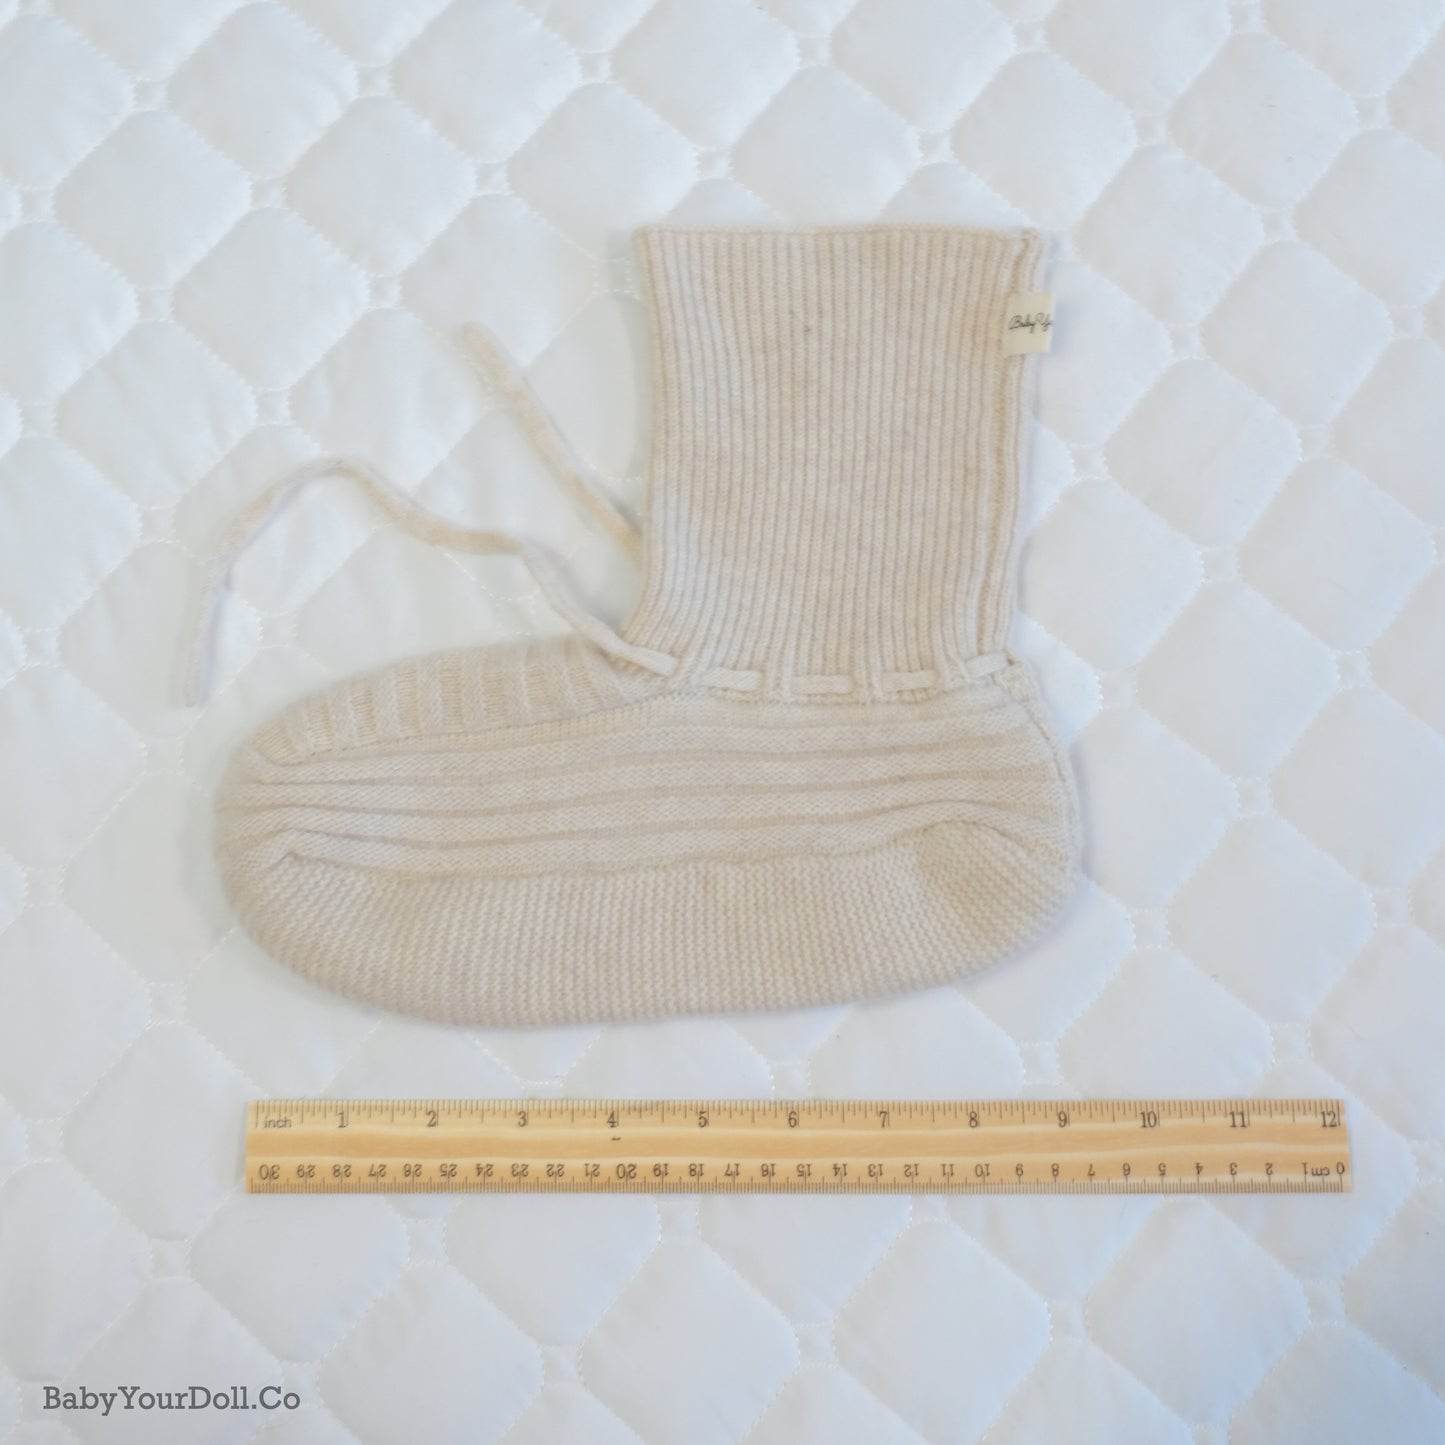 Cashmere Adult Knit Baby Booties| Blue